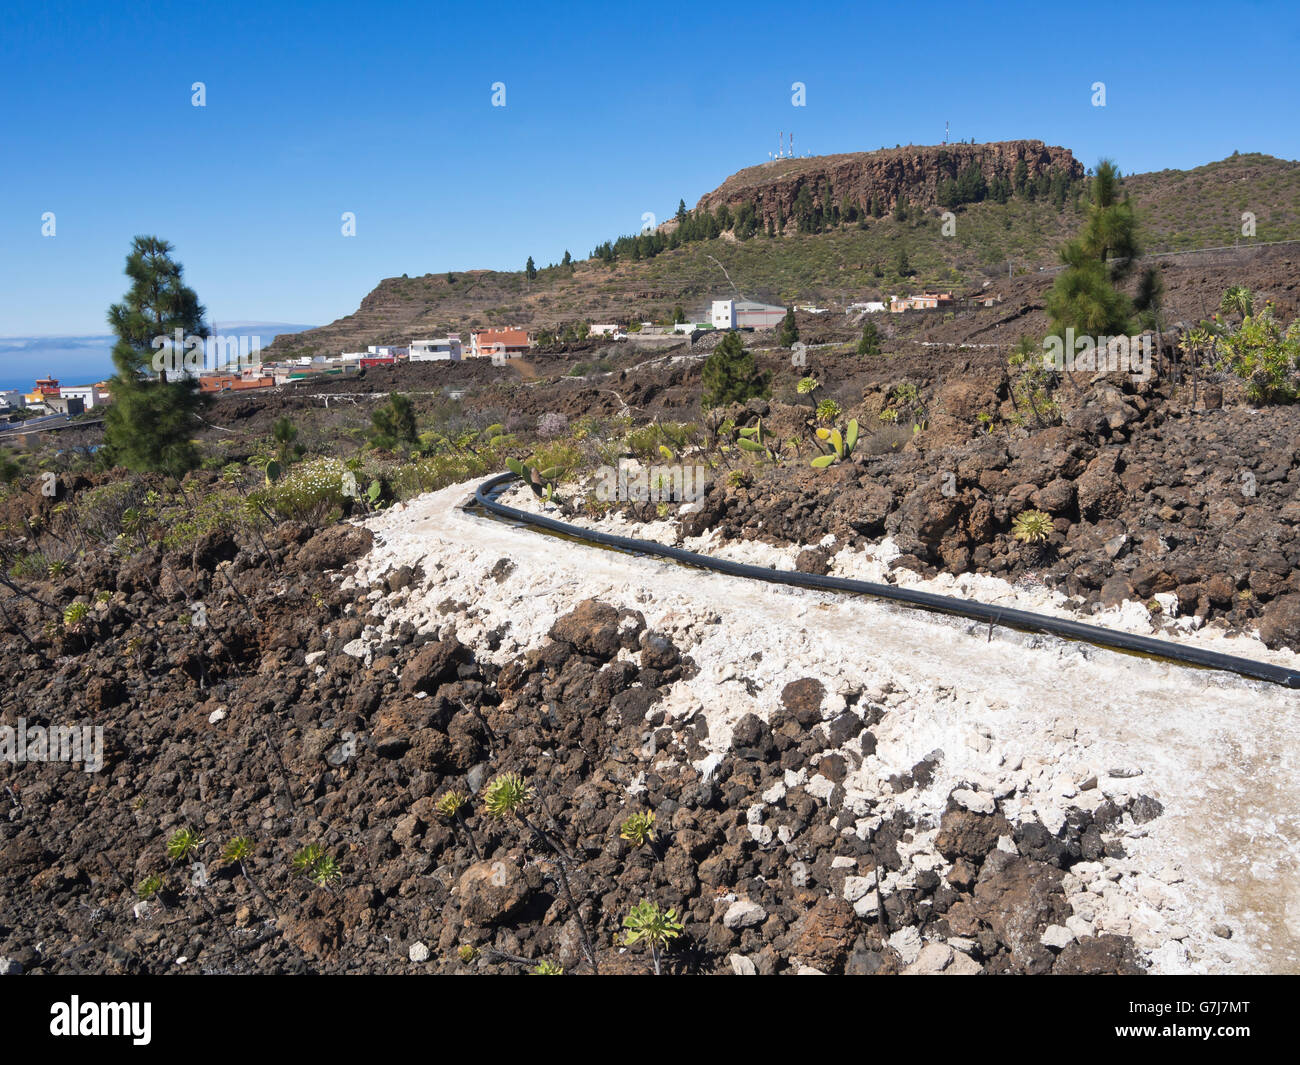 Tenerife Canary Islands Spain, open concrete water canal near Arguayo through lava fields carrying water to the fields Stock Photo